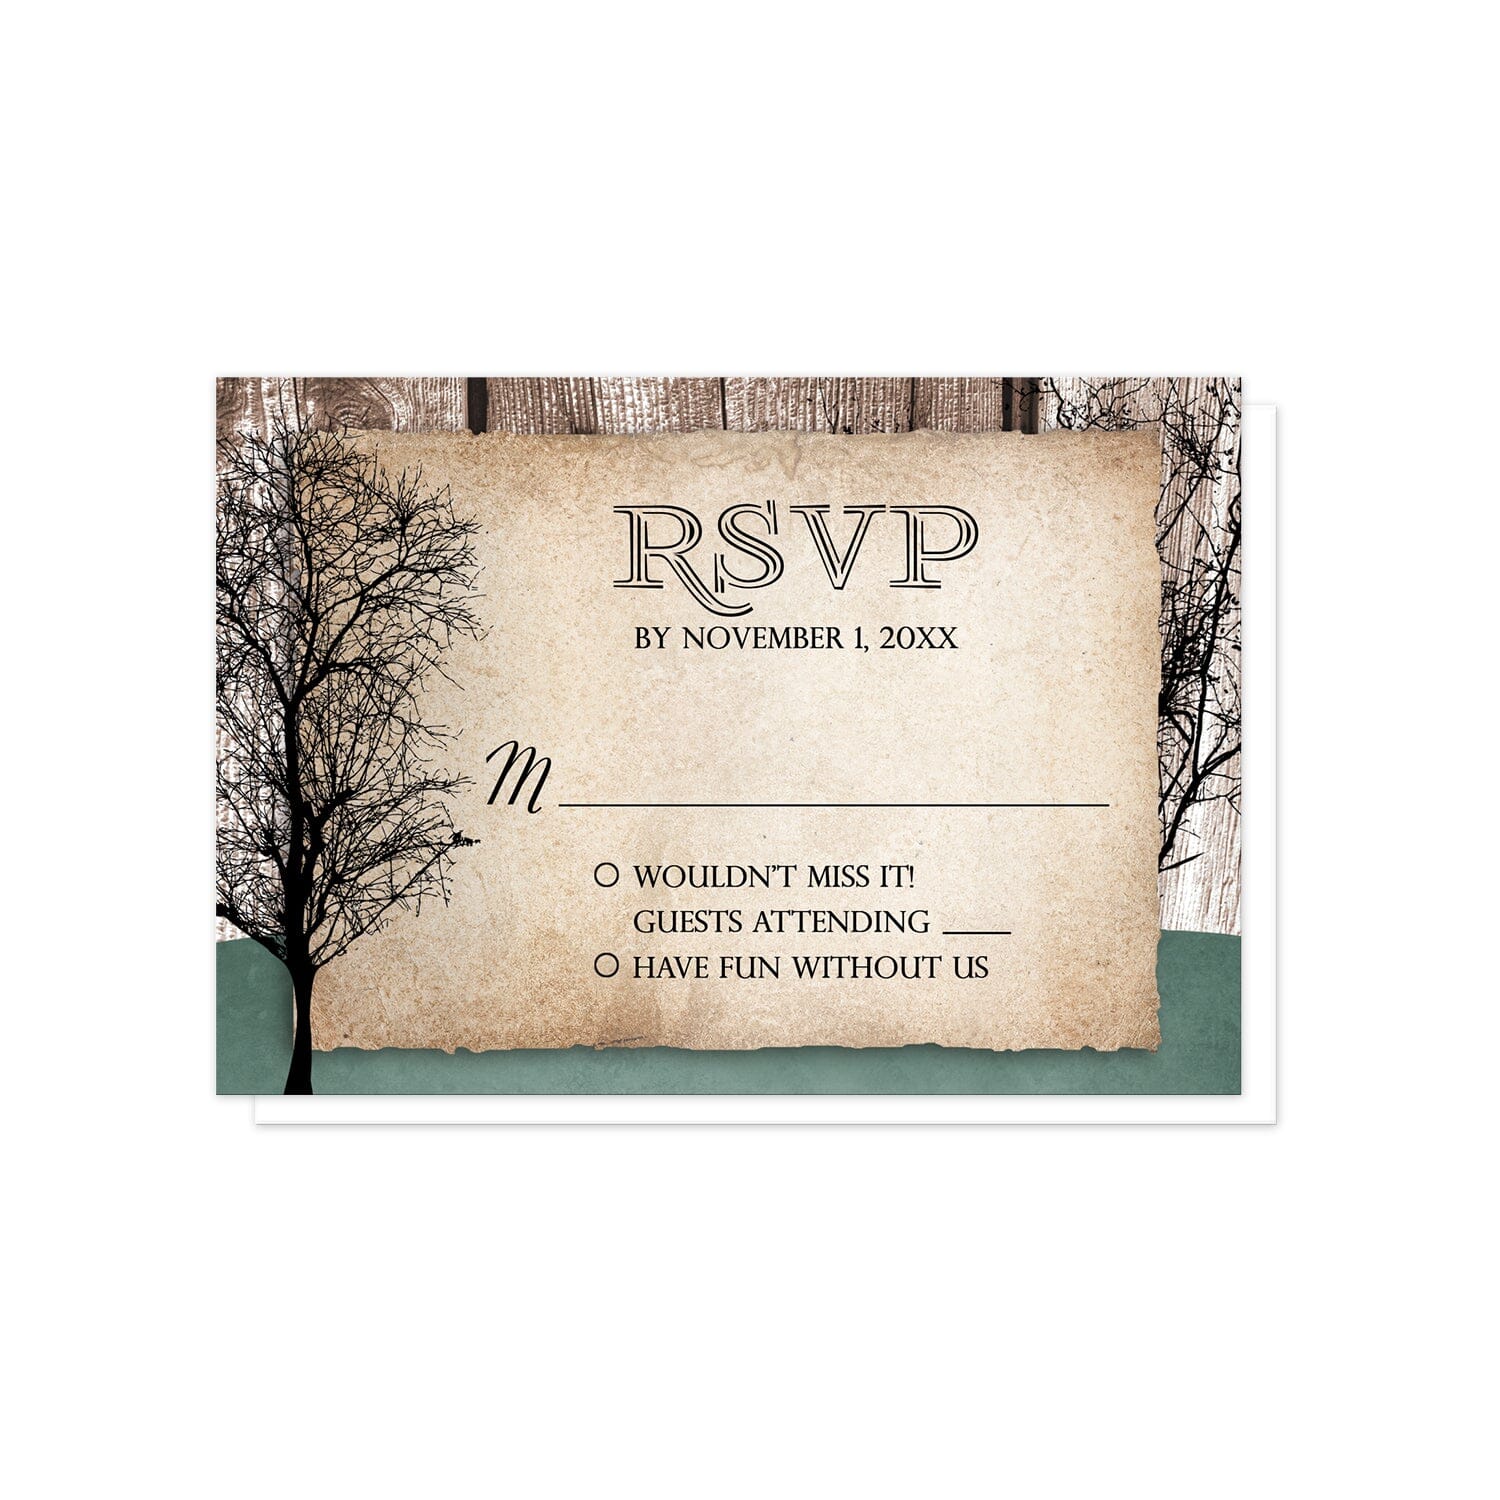 Rustic Woodsy Deer RSVP Cards at Artistically Invited. Rustic woodsy deer wedding invitations designed with silhouettes of a buck deer with antlers, a doe, and winter trees over a wood brown background and a faded hunter green design along the bottom. Your personalized RSVP date details are custom printed in black over a tattered rustic paper illustration between the deer.